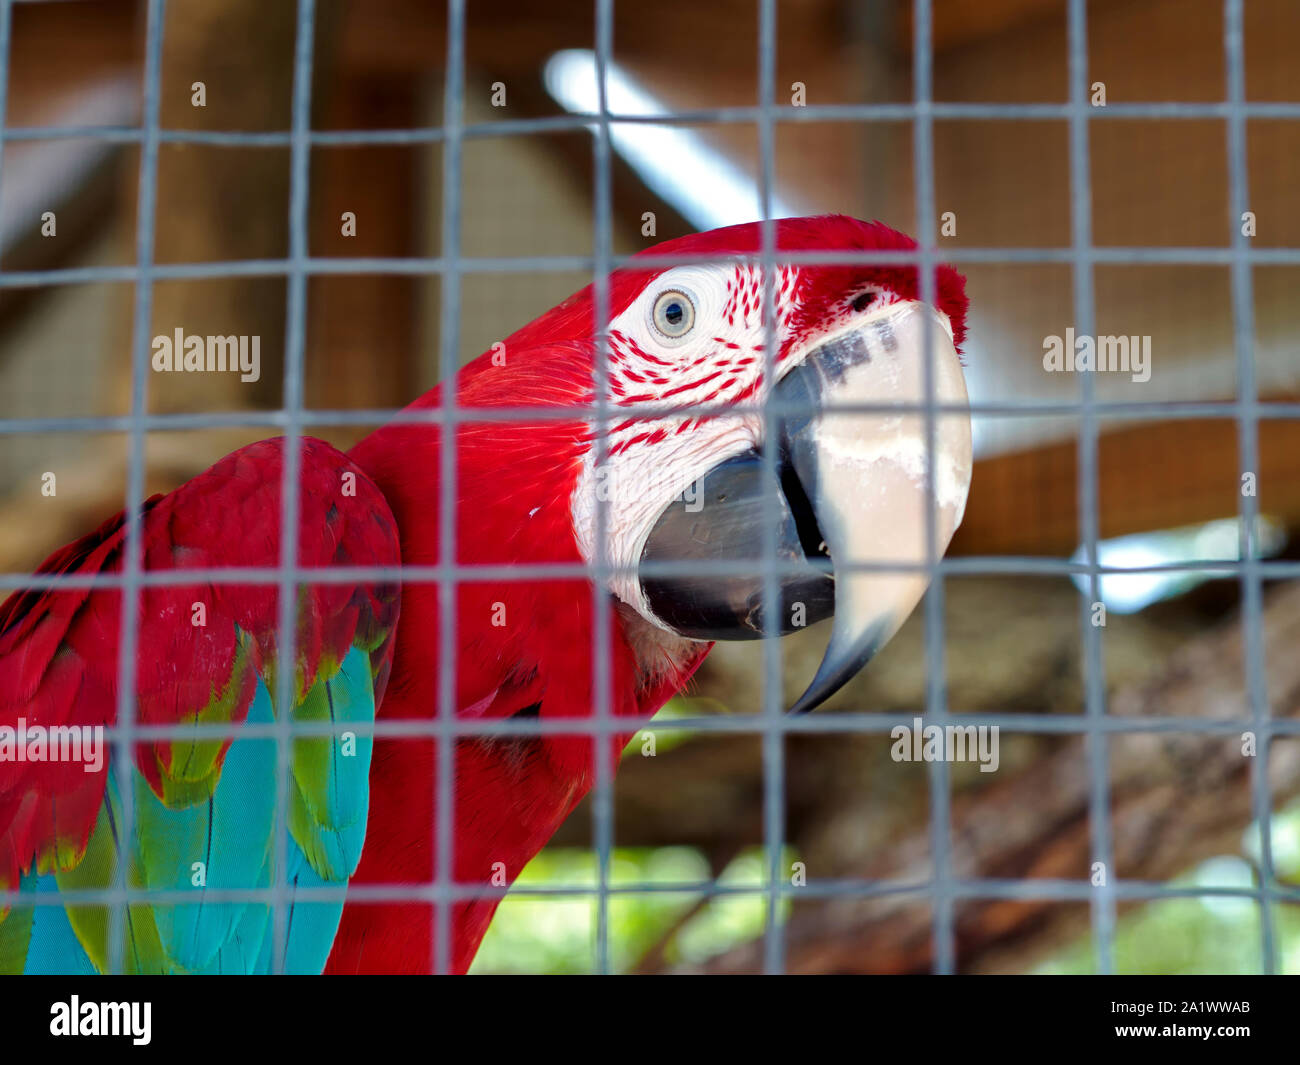 Caged Red-and-green Macaw (Ara chloropterus), also known as the Green-winged Macaw. South Texas Botanical Gardens. Corpus Christi, Texas USA. Stock Photo